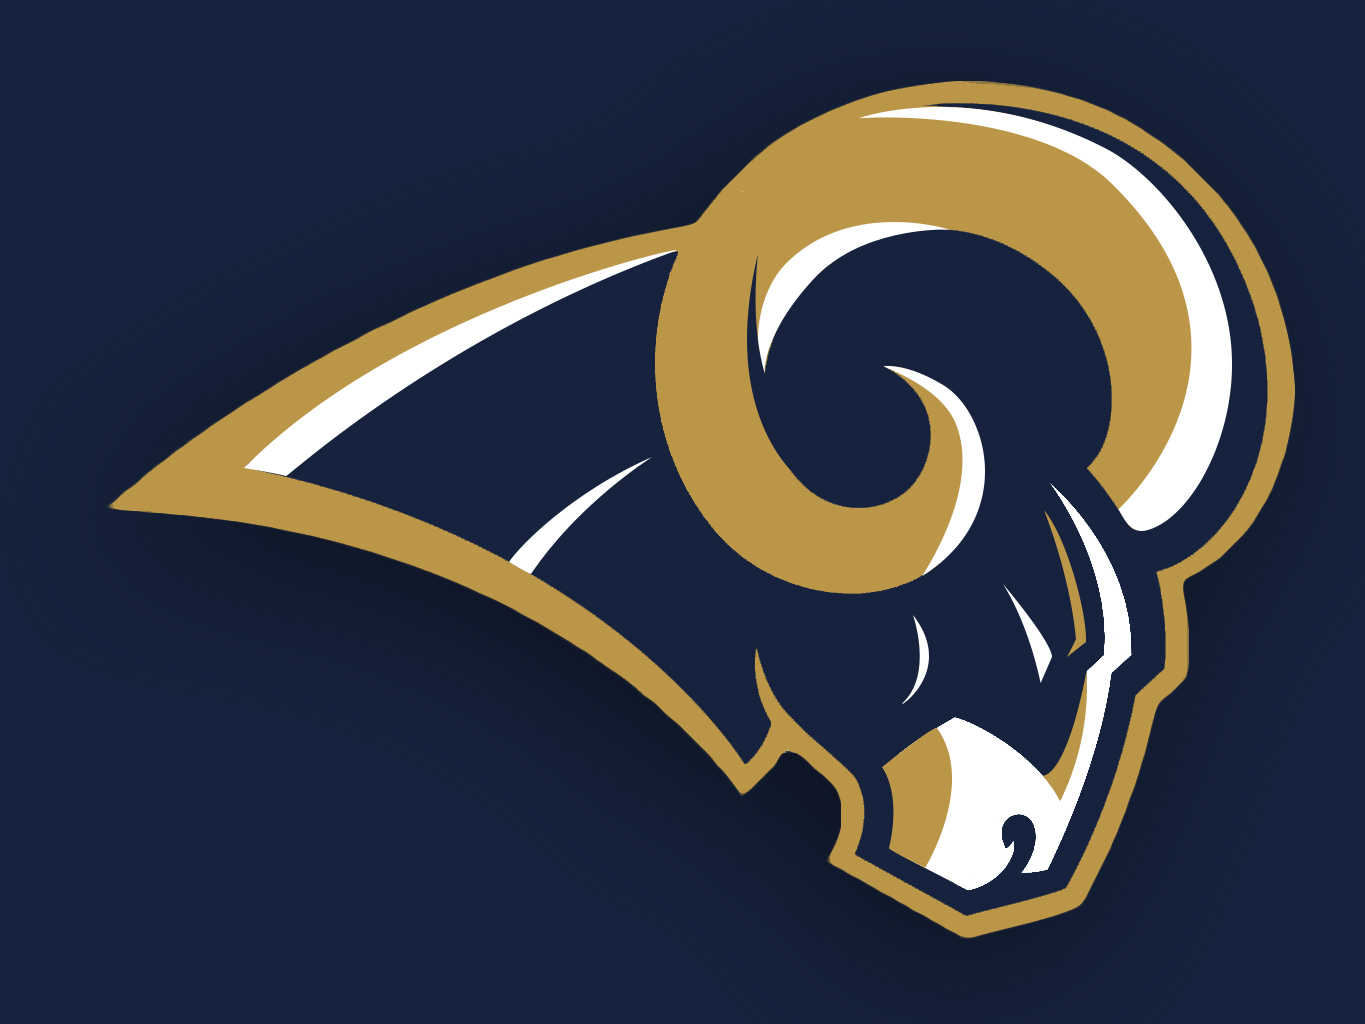 Next Up Is Logan Stone With A Rams Logo